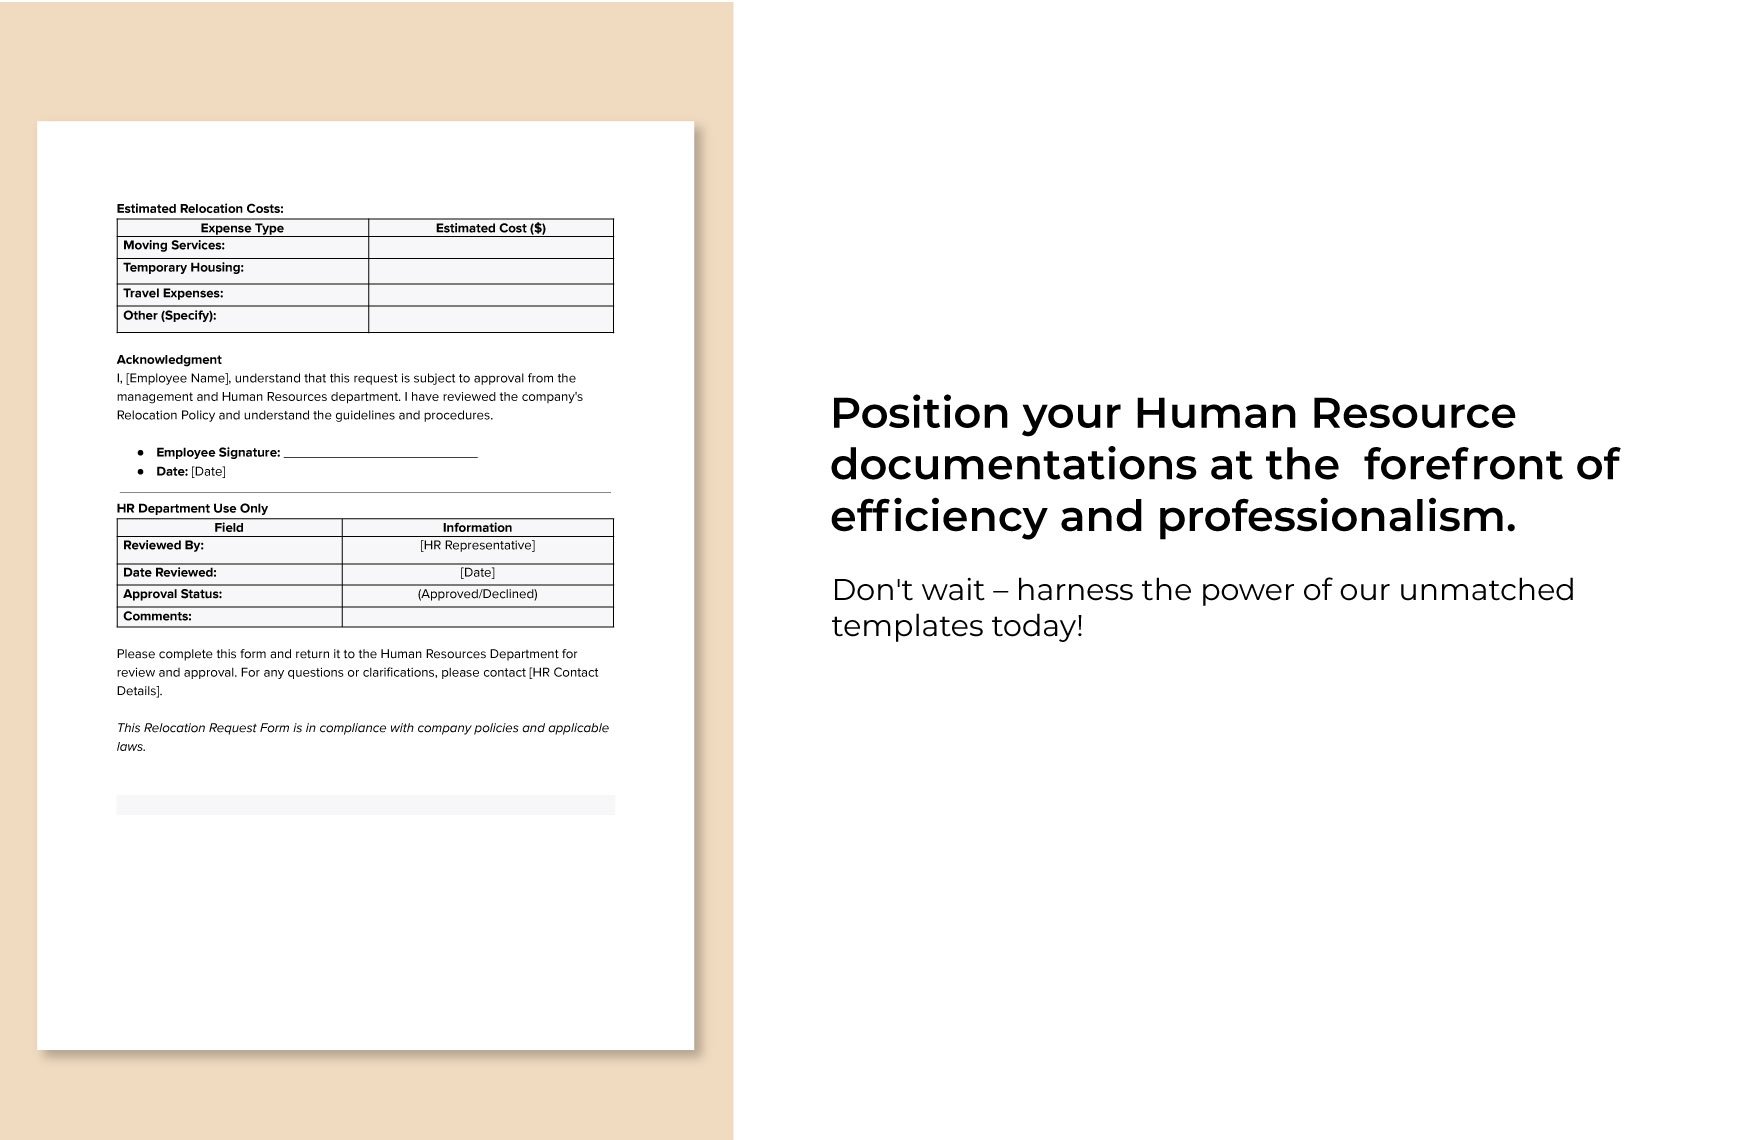 Relocation Request Form HR Template